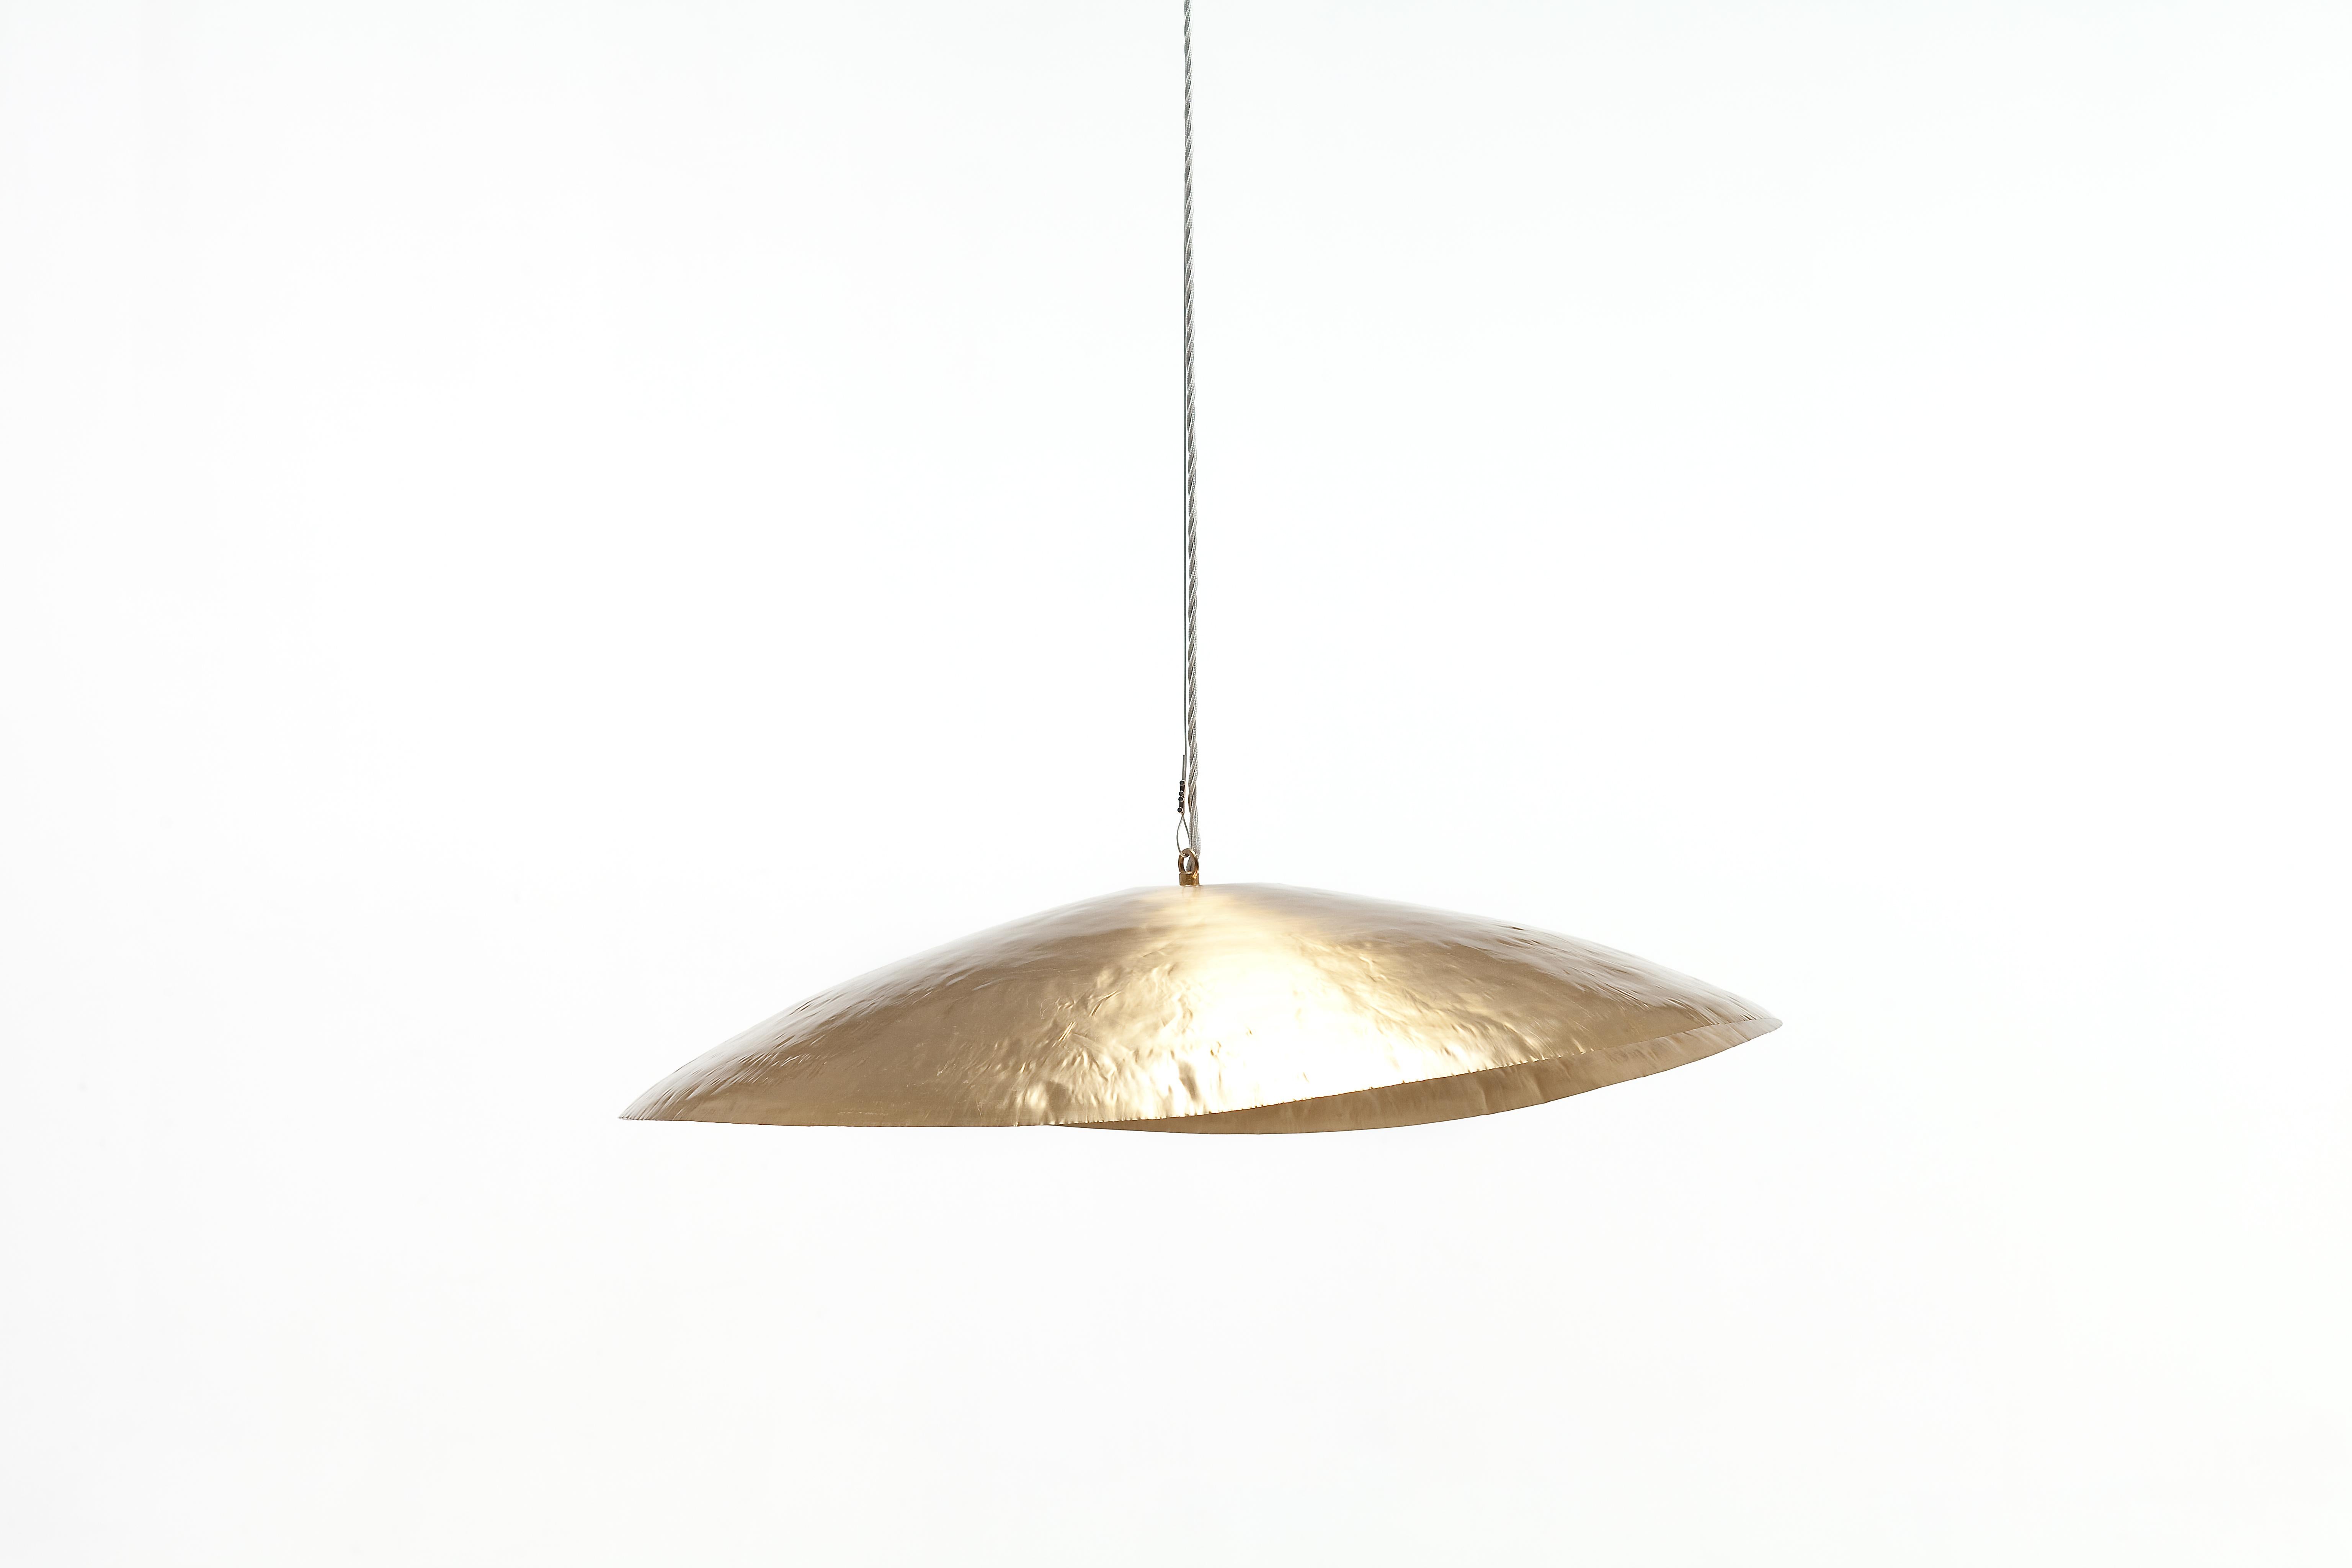 With a strong decorative impact, the BRASS lamp family exploits the ductility of brass and its ability to embellish interiors with warm and golden light reflections. Suspension lamps have a delicate shape of great visual appeal: a light brass disc